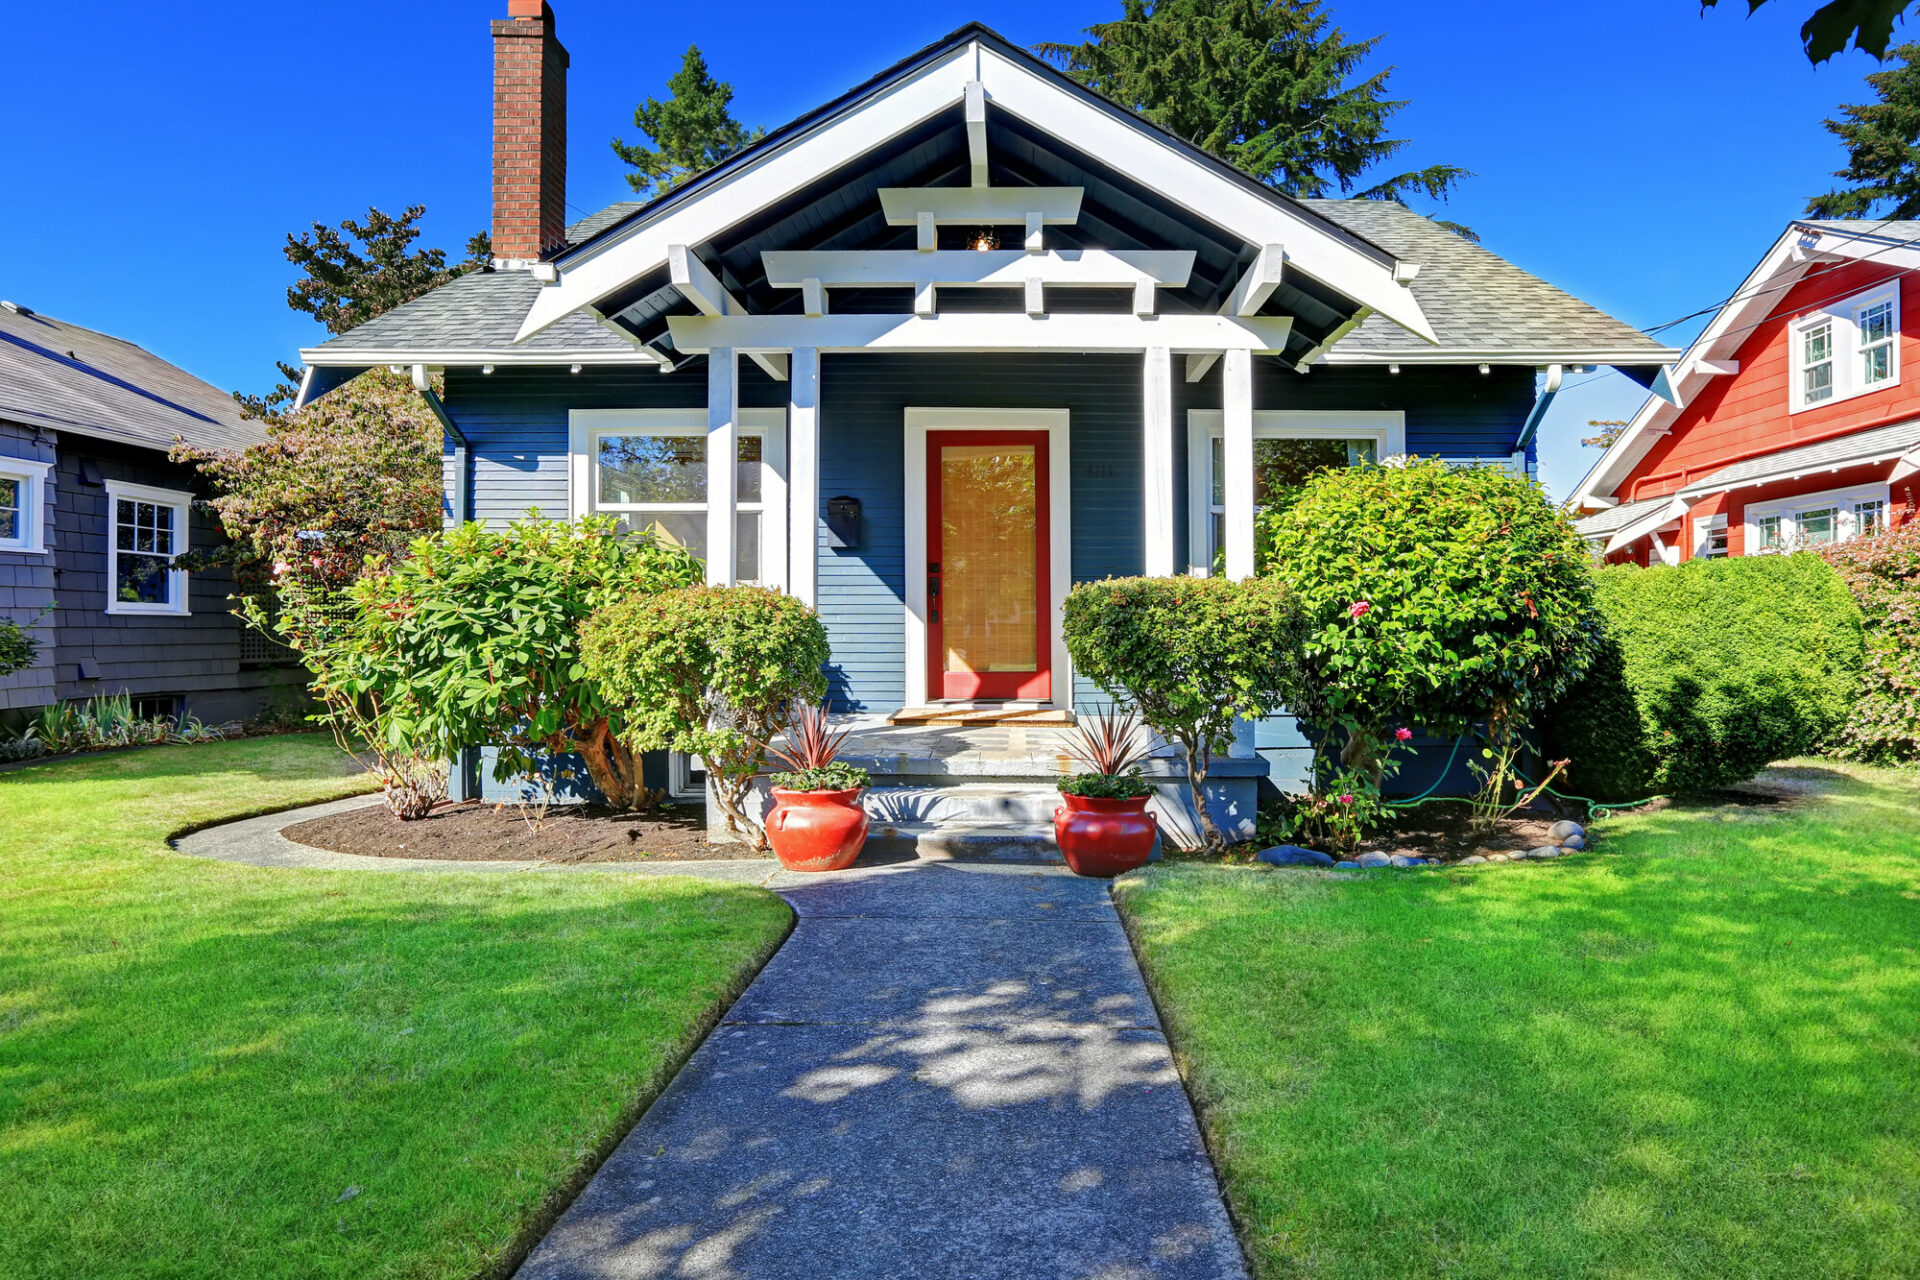 A navy blue craftsman home with red front door.